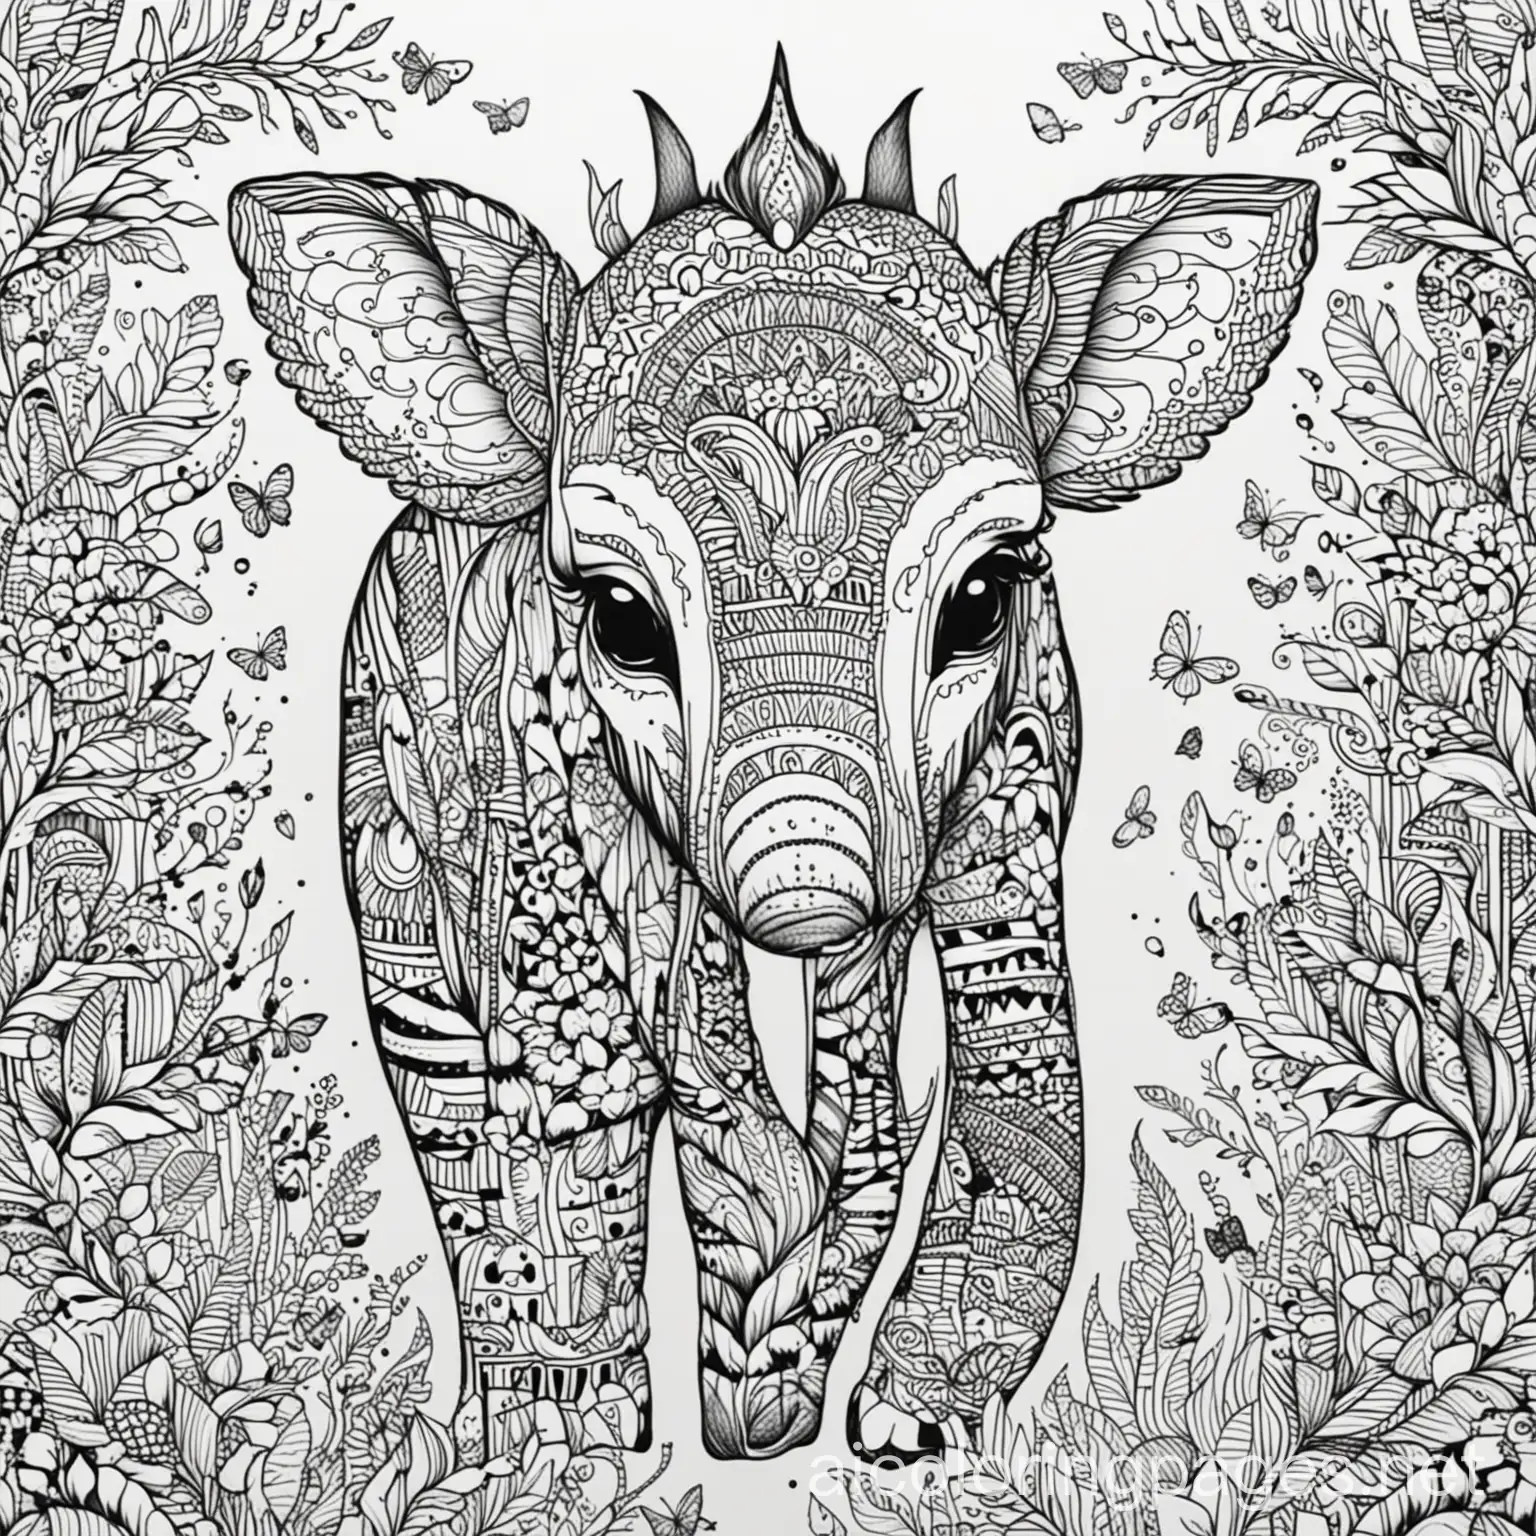 Coloring pages of animals with patterns in them black and white, Coloring Page, black and white, line art, white background, Simplicity, Ample White Space